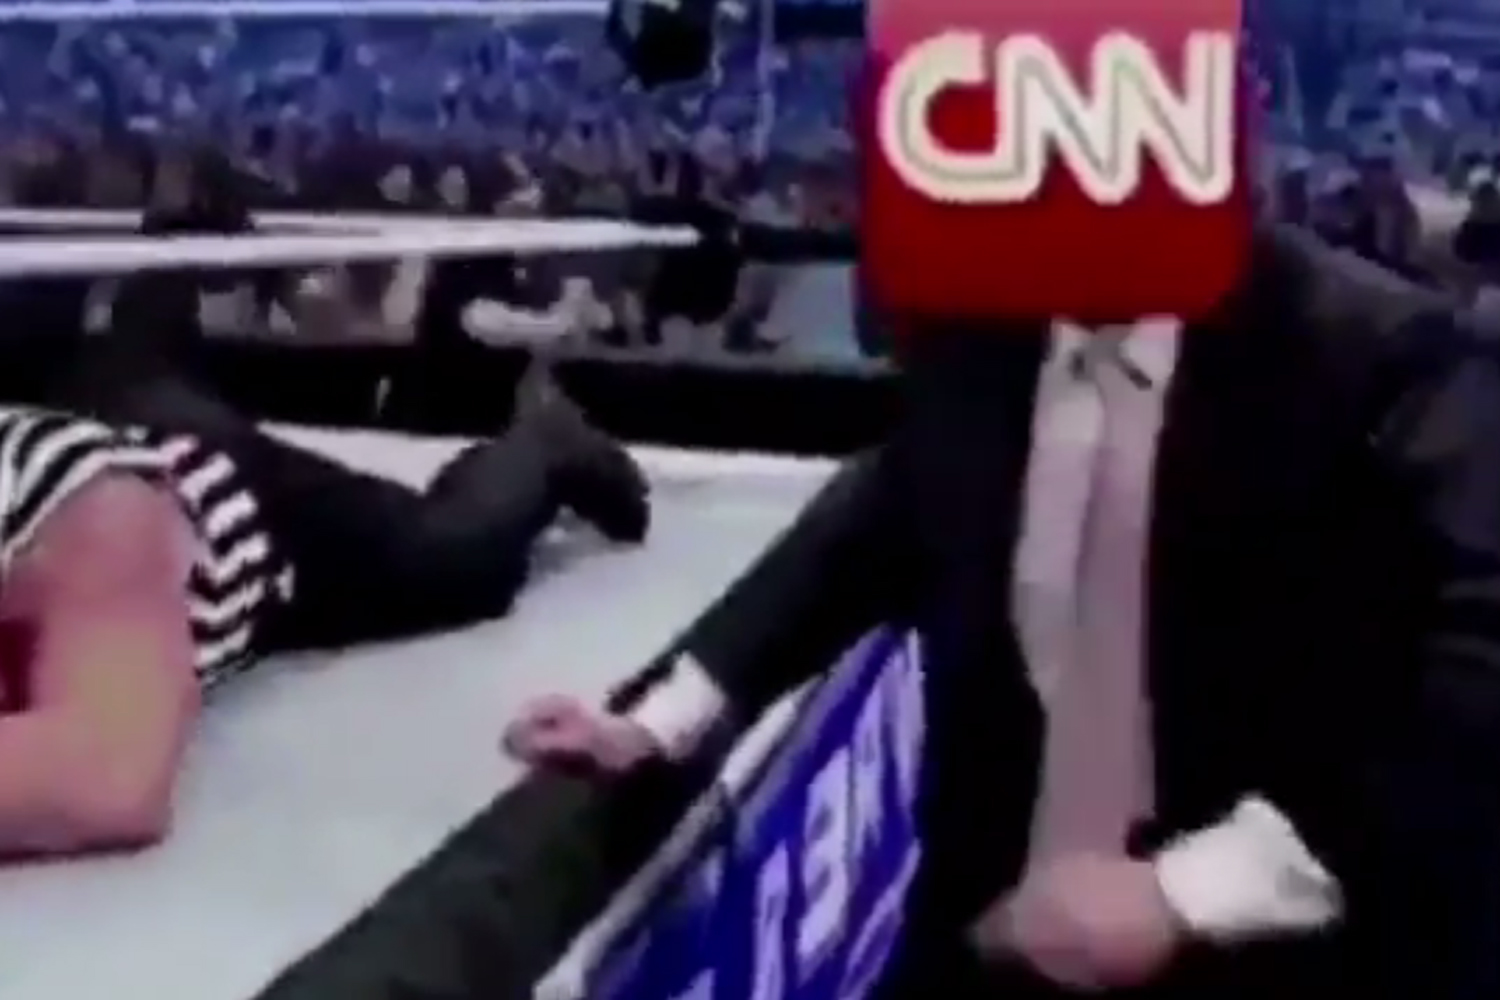 A video posted by President Donald Trump on Twitter Sunday morning shows the president body-slamming a representation of CNN. (@realDonaldTrump/Twitter)